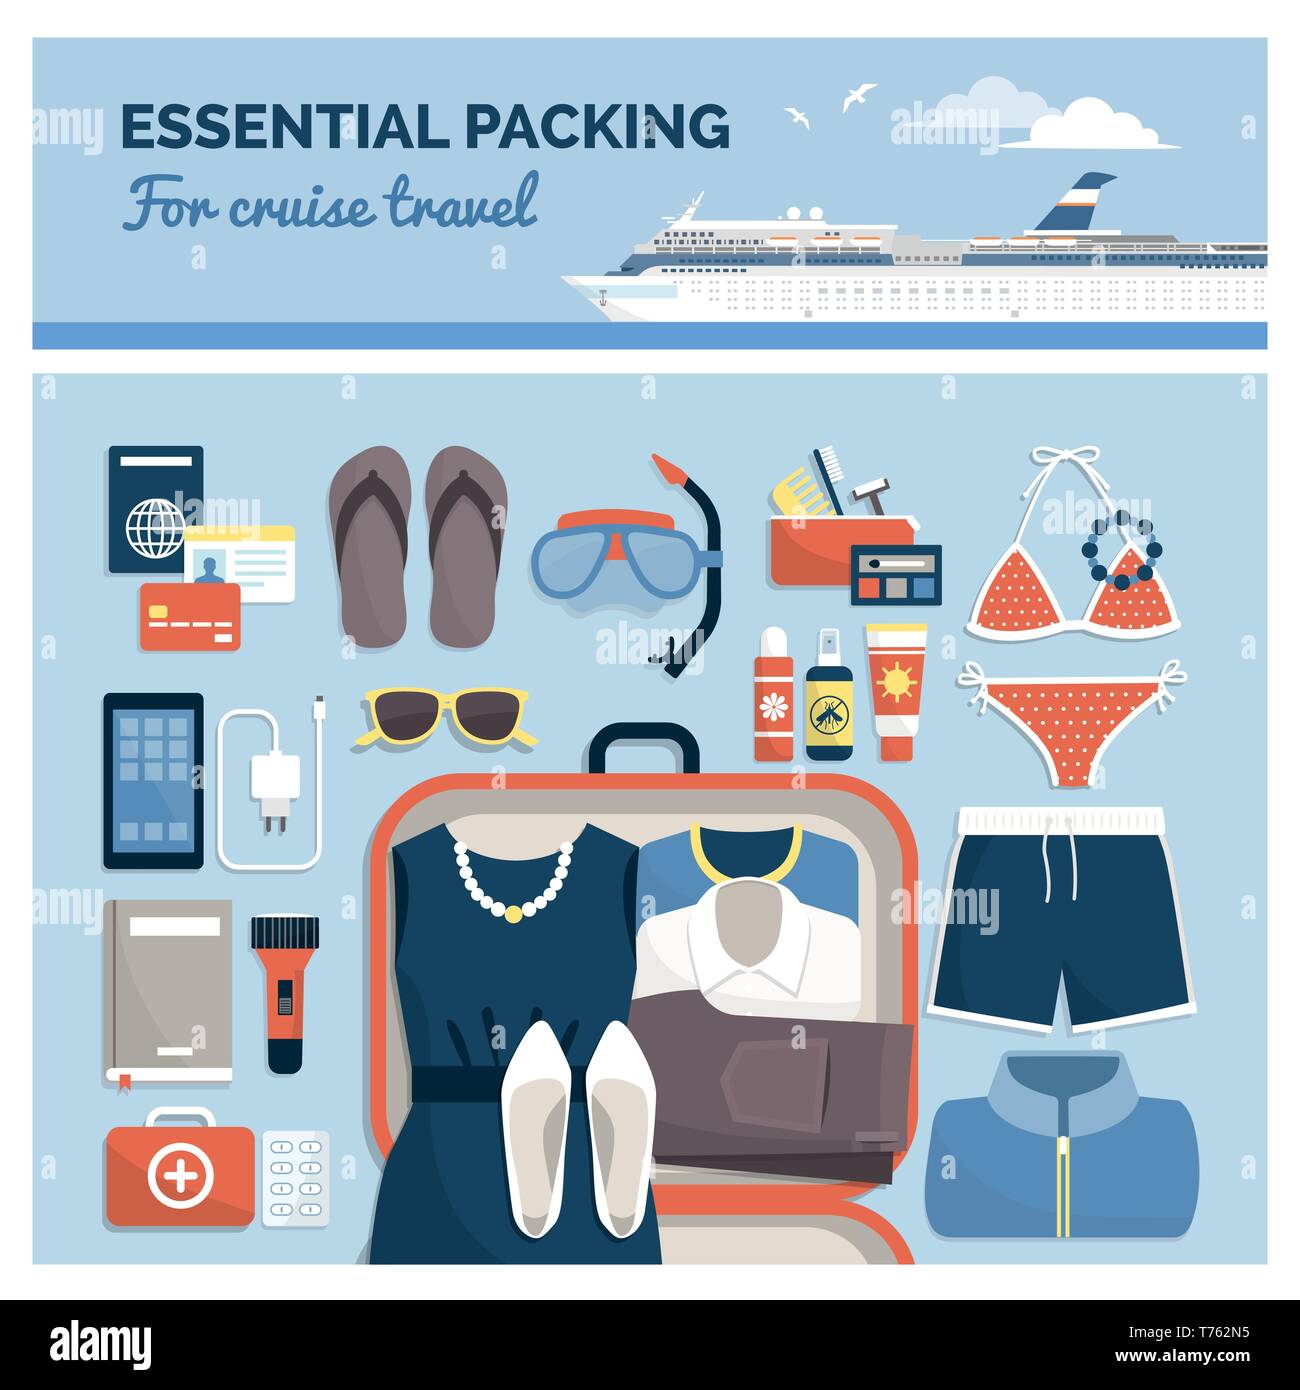 Essential packing for cruise travel and honeymoon, male and female items, clothing and accessories ready to pack, flat lay Stock Vector